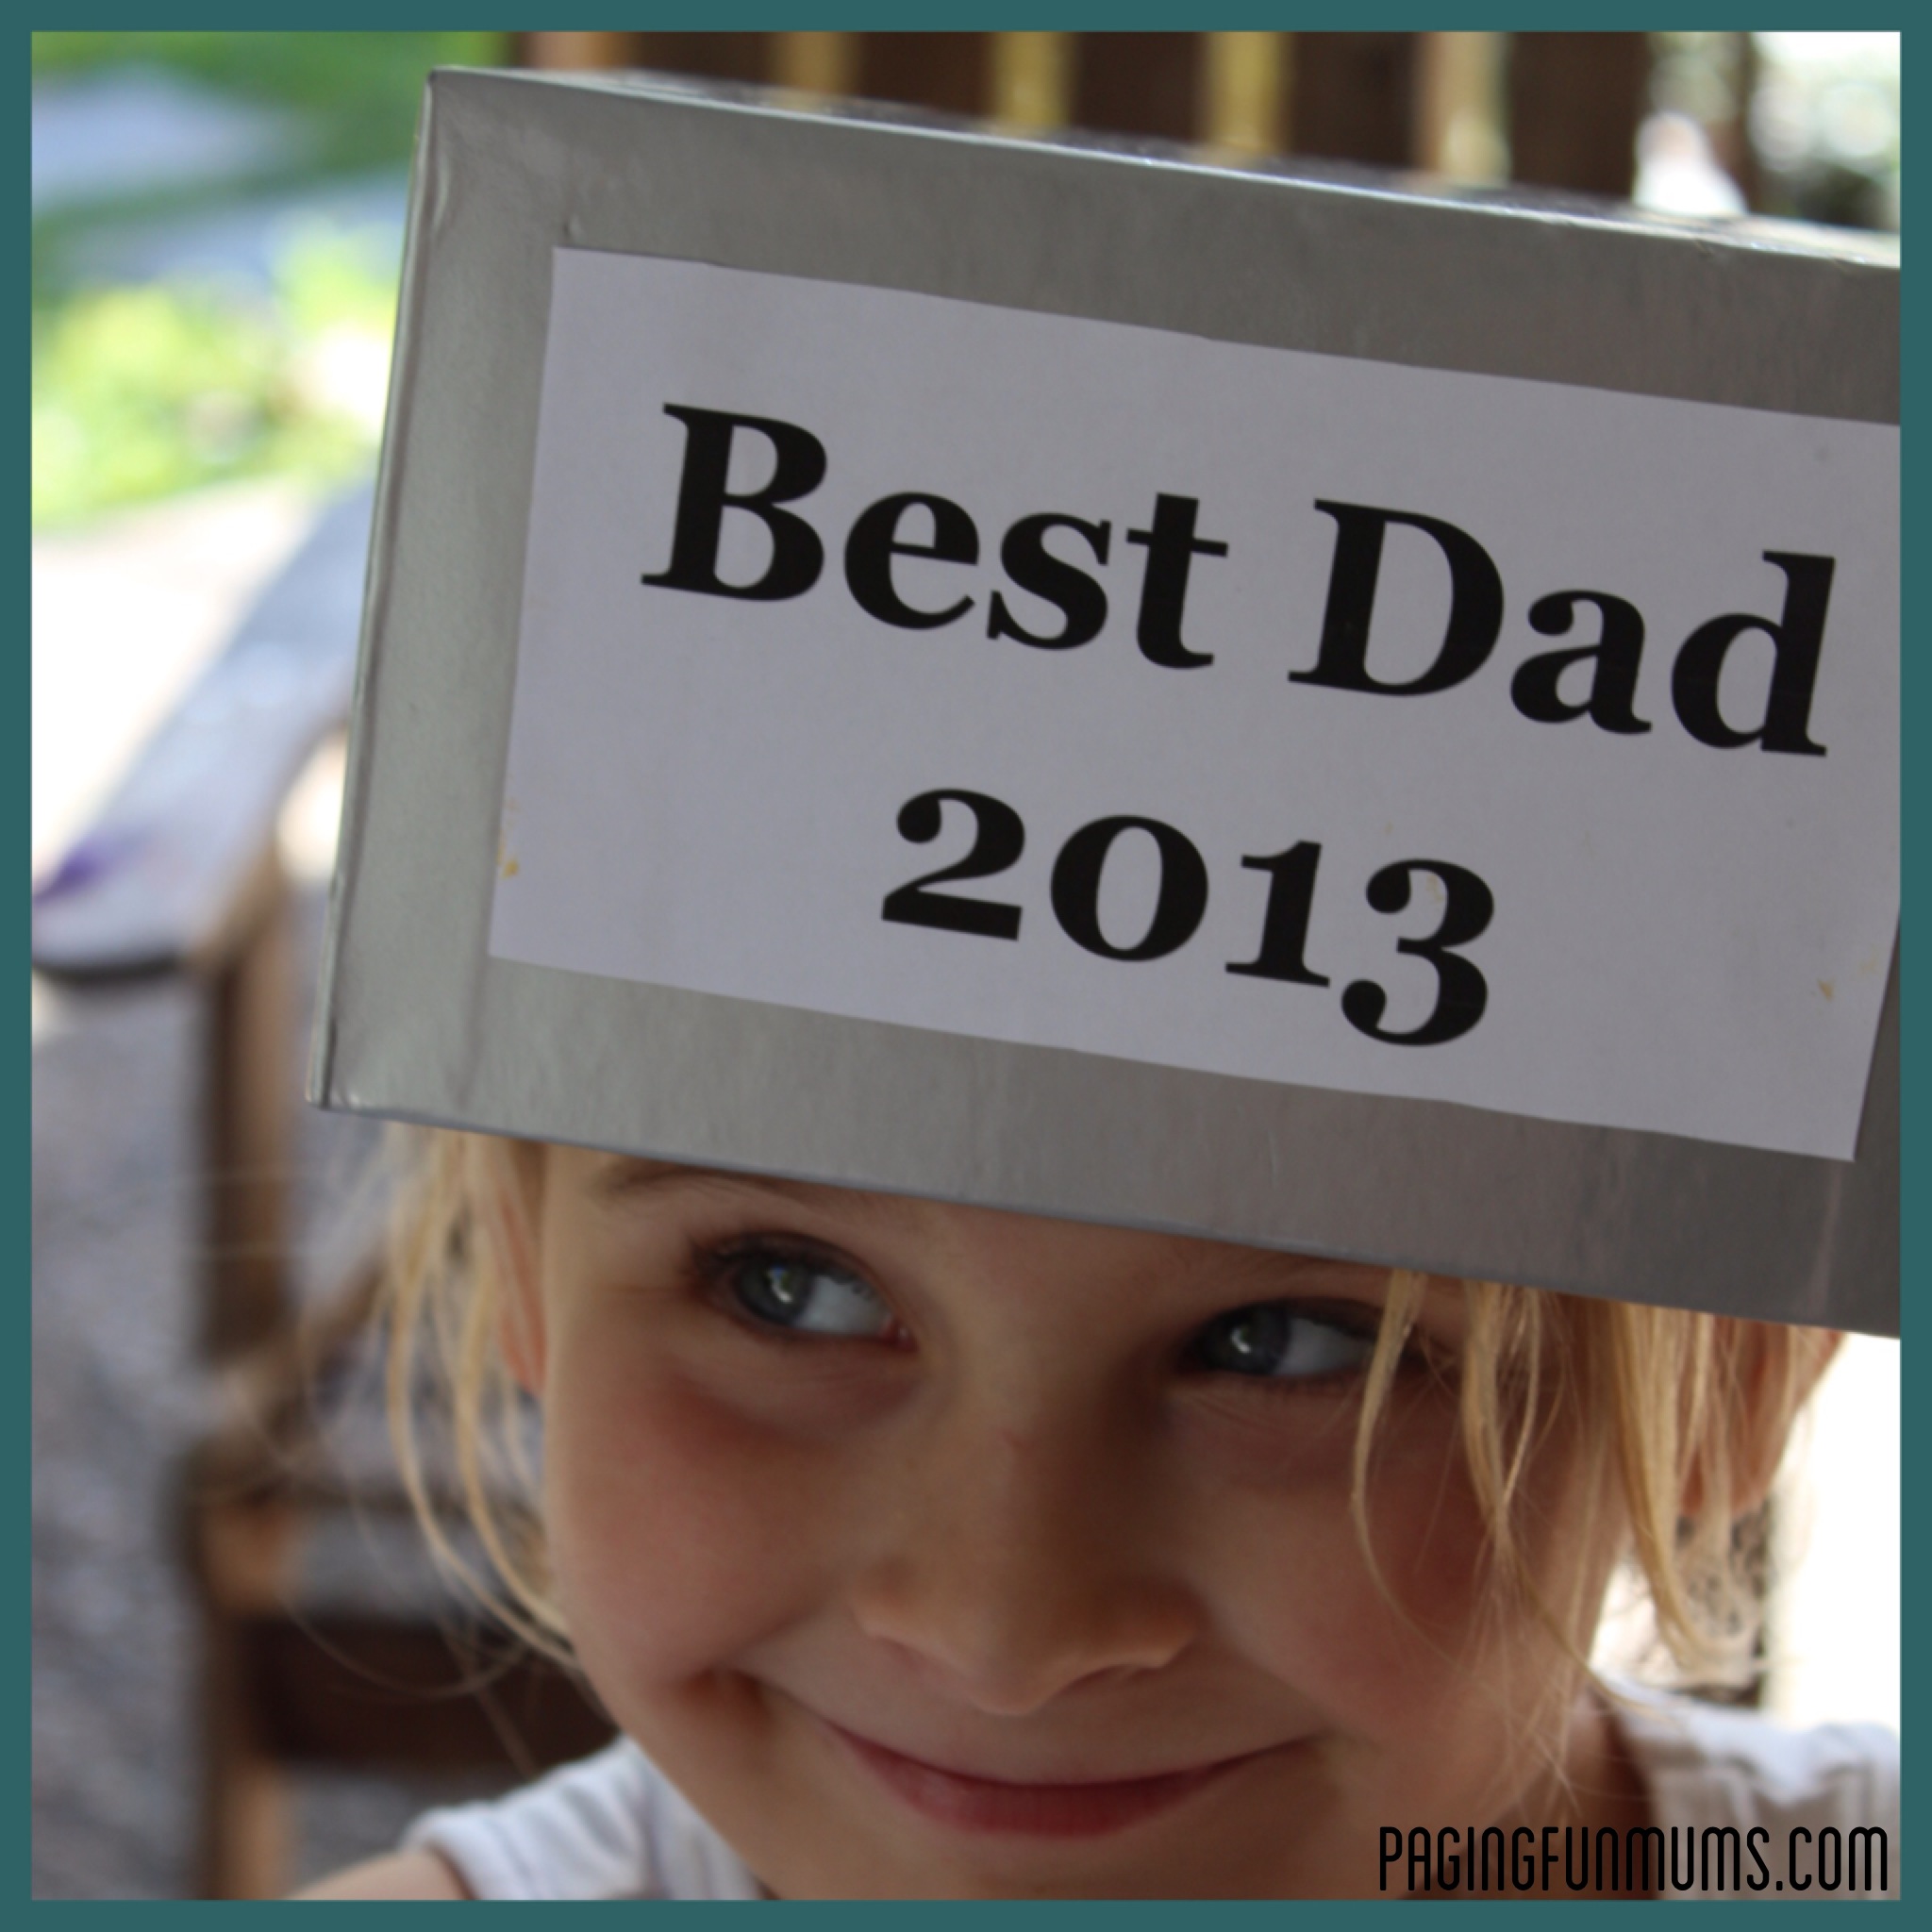 Best Dad Trophy - Great Father's Day Gift when filled with Dad's favourite treats!